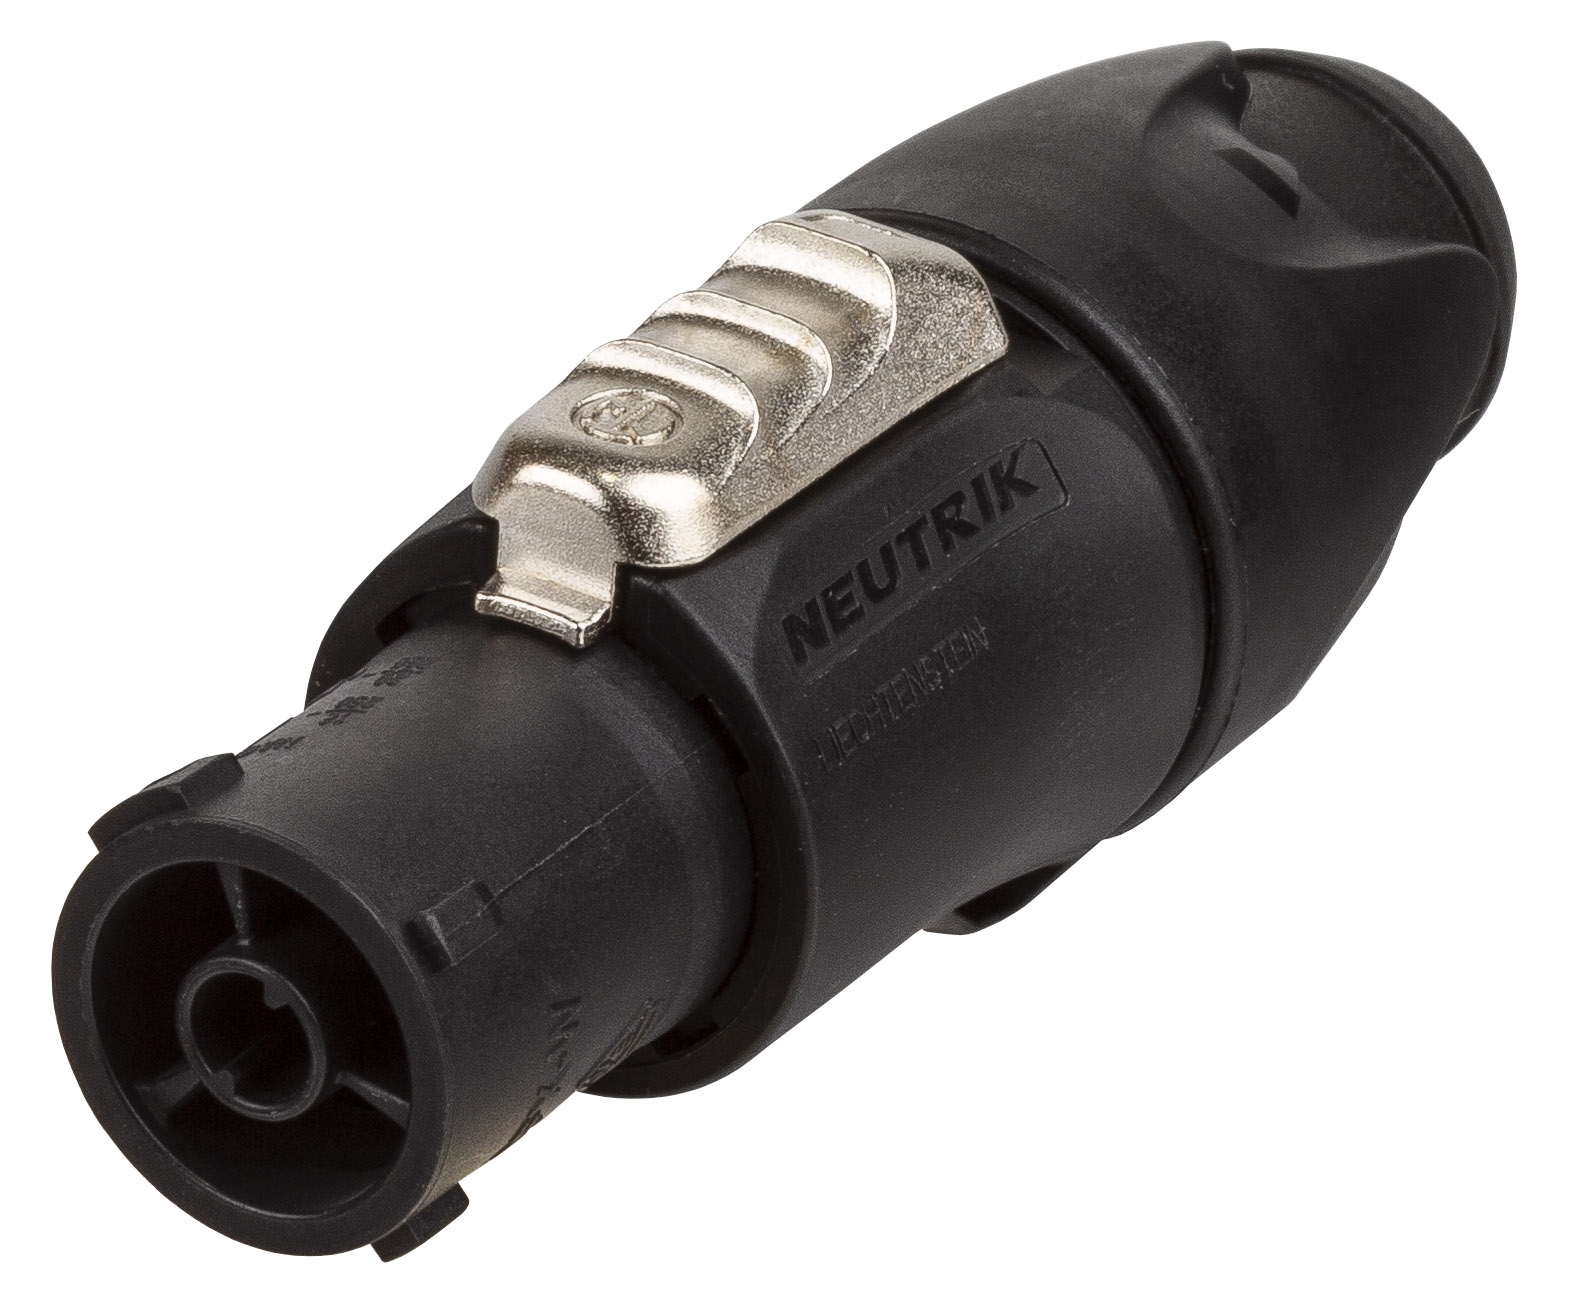 Neutrik PowerCON TRUE1 locking female cable connector with power-in and screw terminals for outdoor applications.